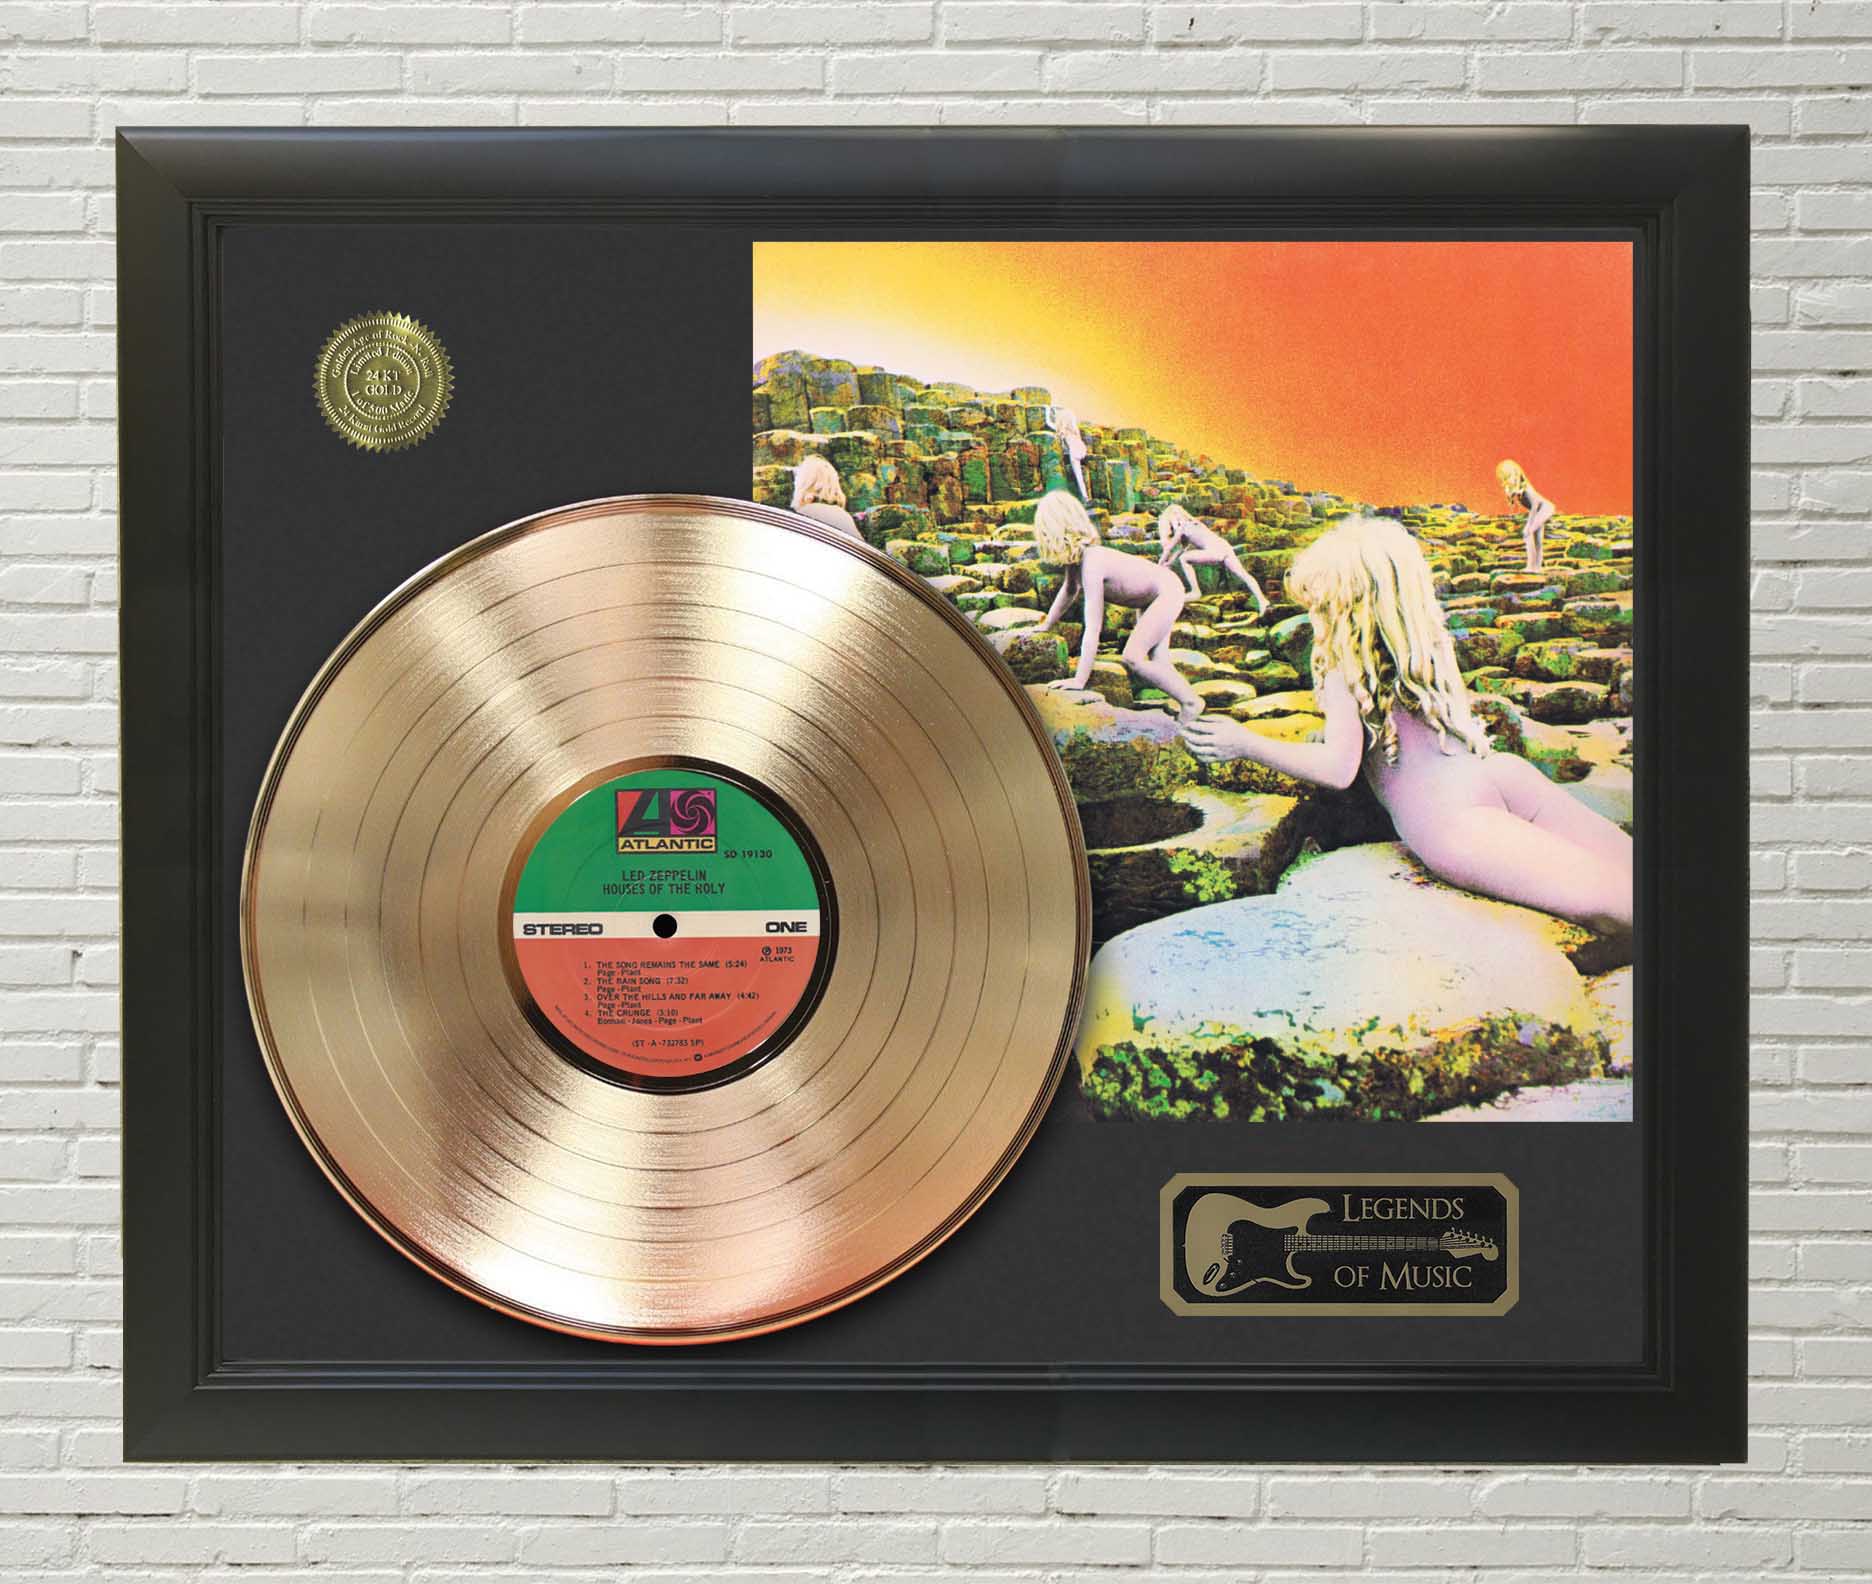 Led Zeppelin – House Of The Holy Framed Gold Record LP Display 